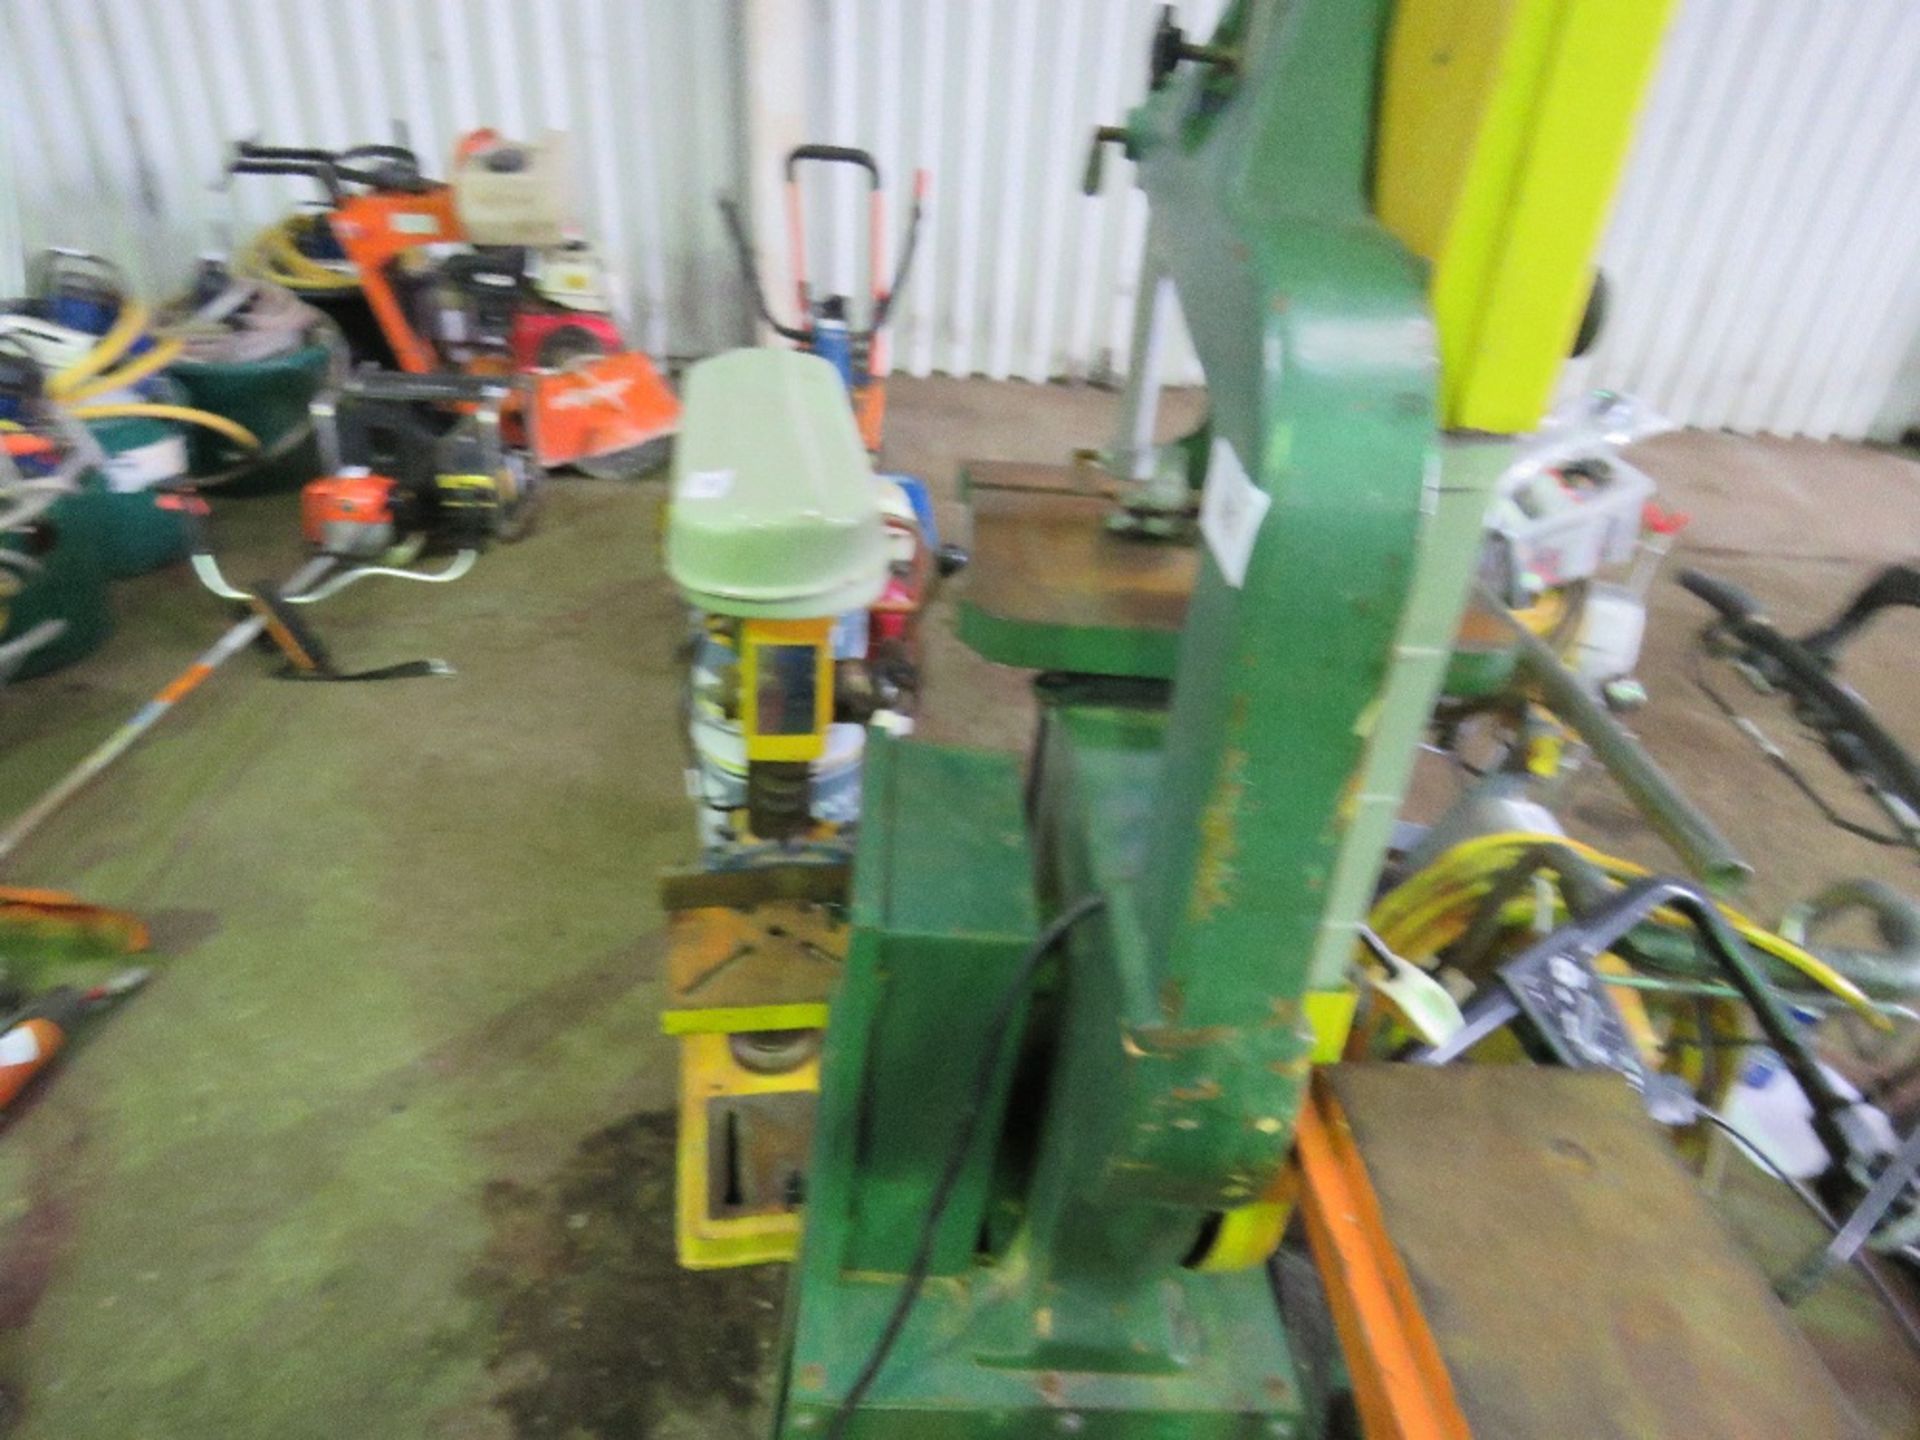 240VOLT SMALL SIZED BANDSAW, WORKING WHEN REMOVED. SOURCED FROM WORKSHOP CLOSURE. - Image 2 of 4